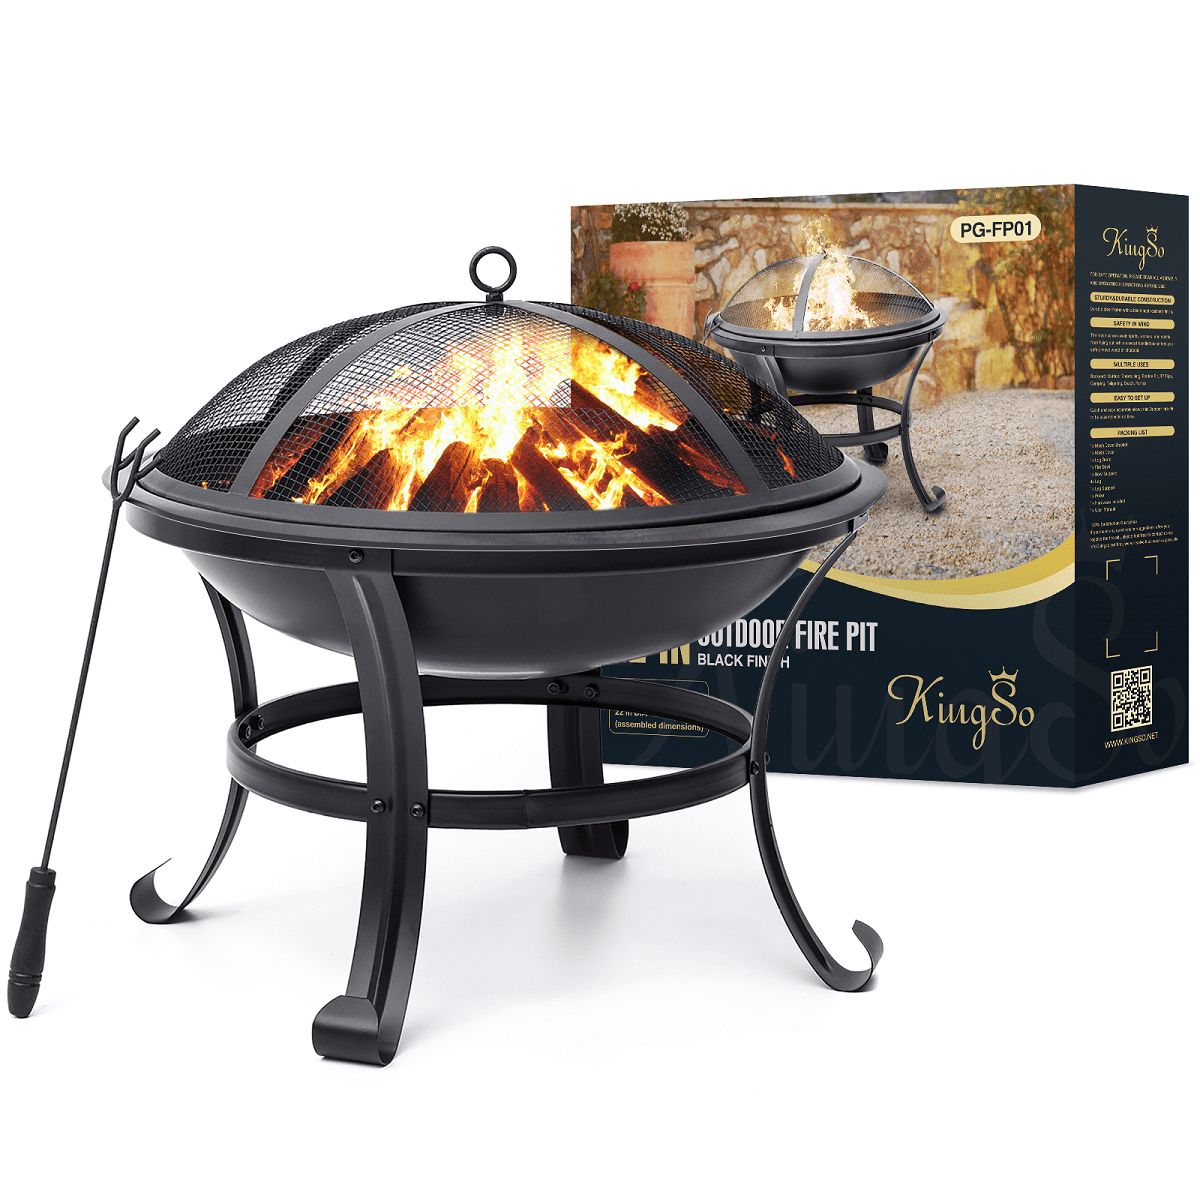 Large Fire Bowl Fire Pit For Garden Patio Heater BBQ Vintage Design Charcoal 